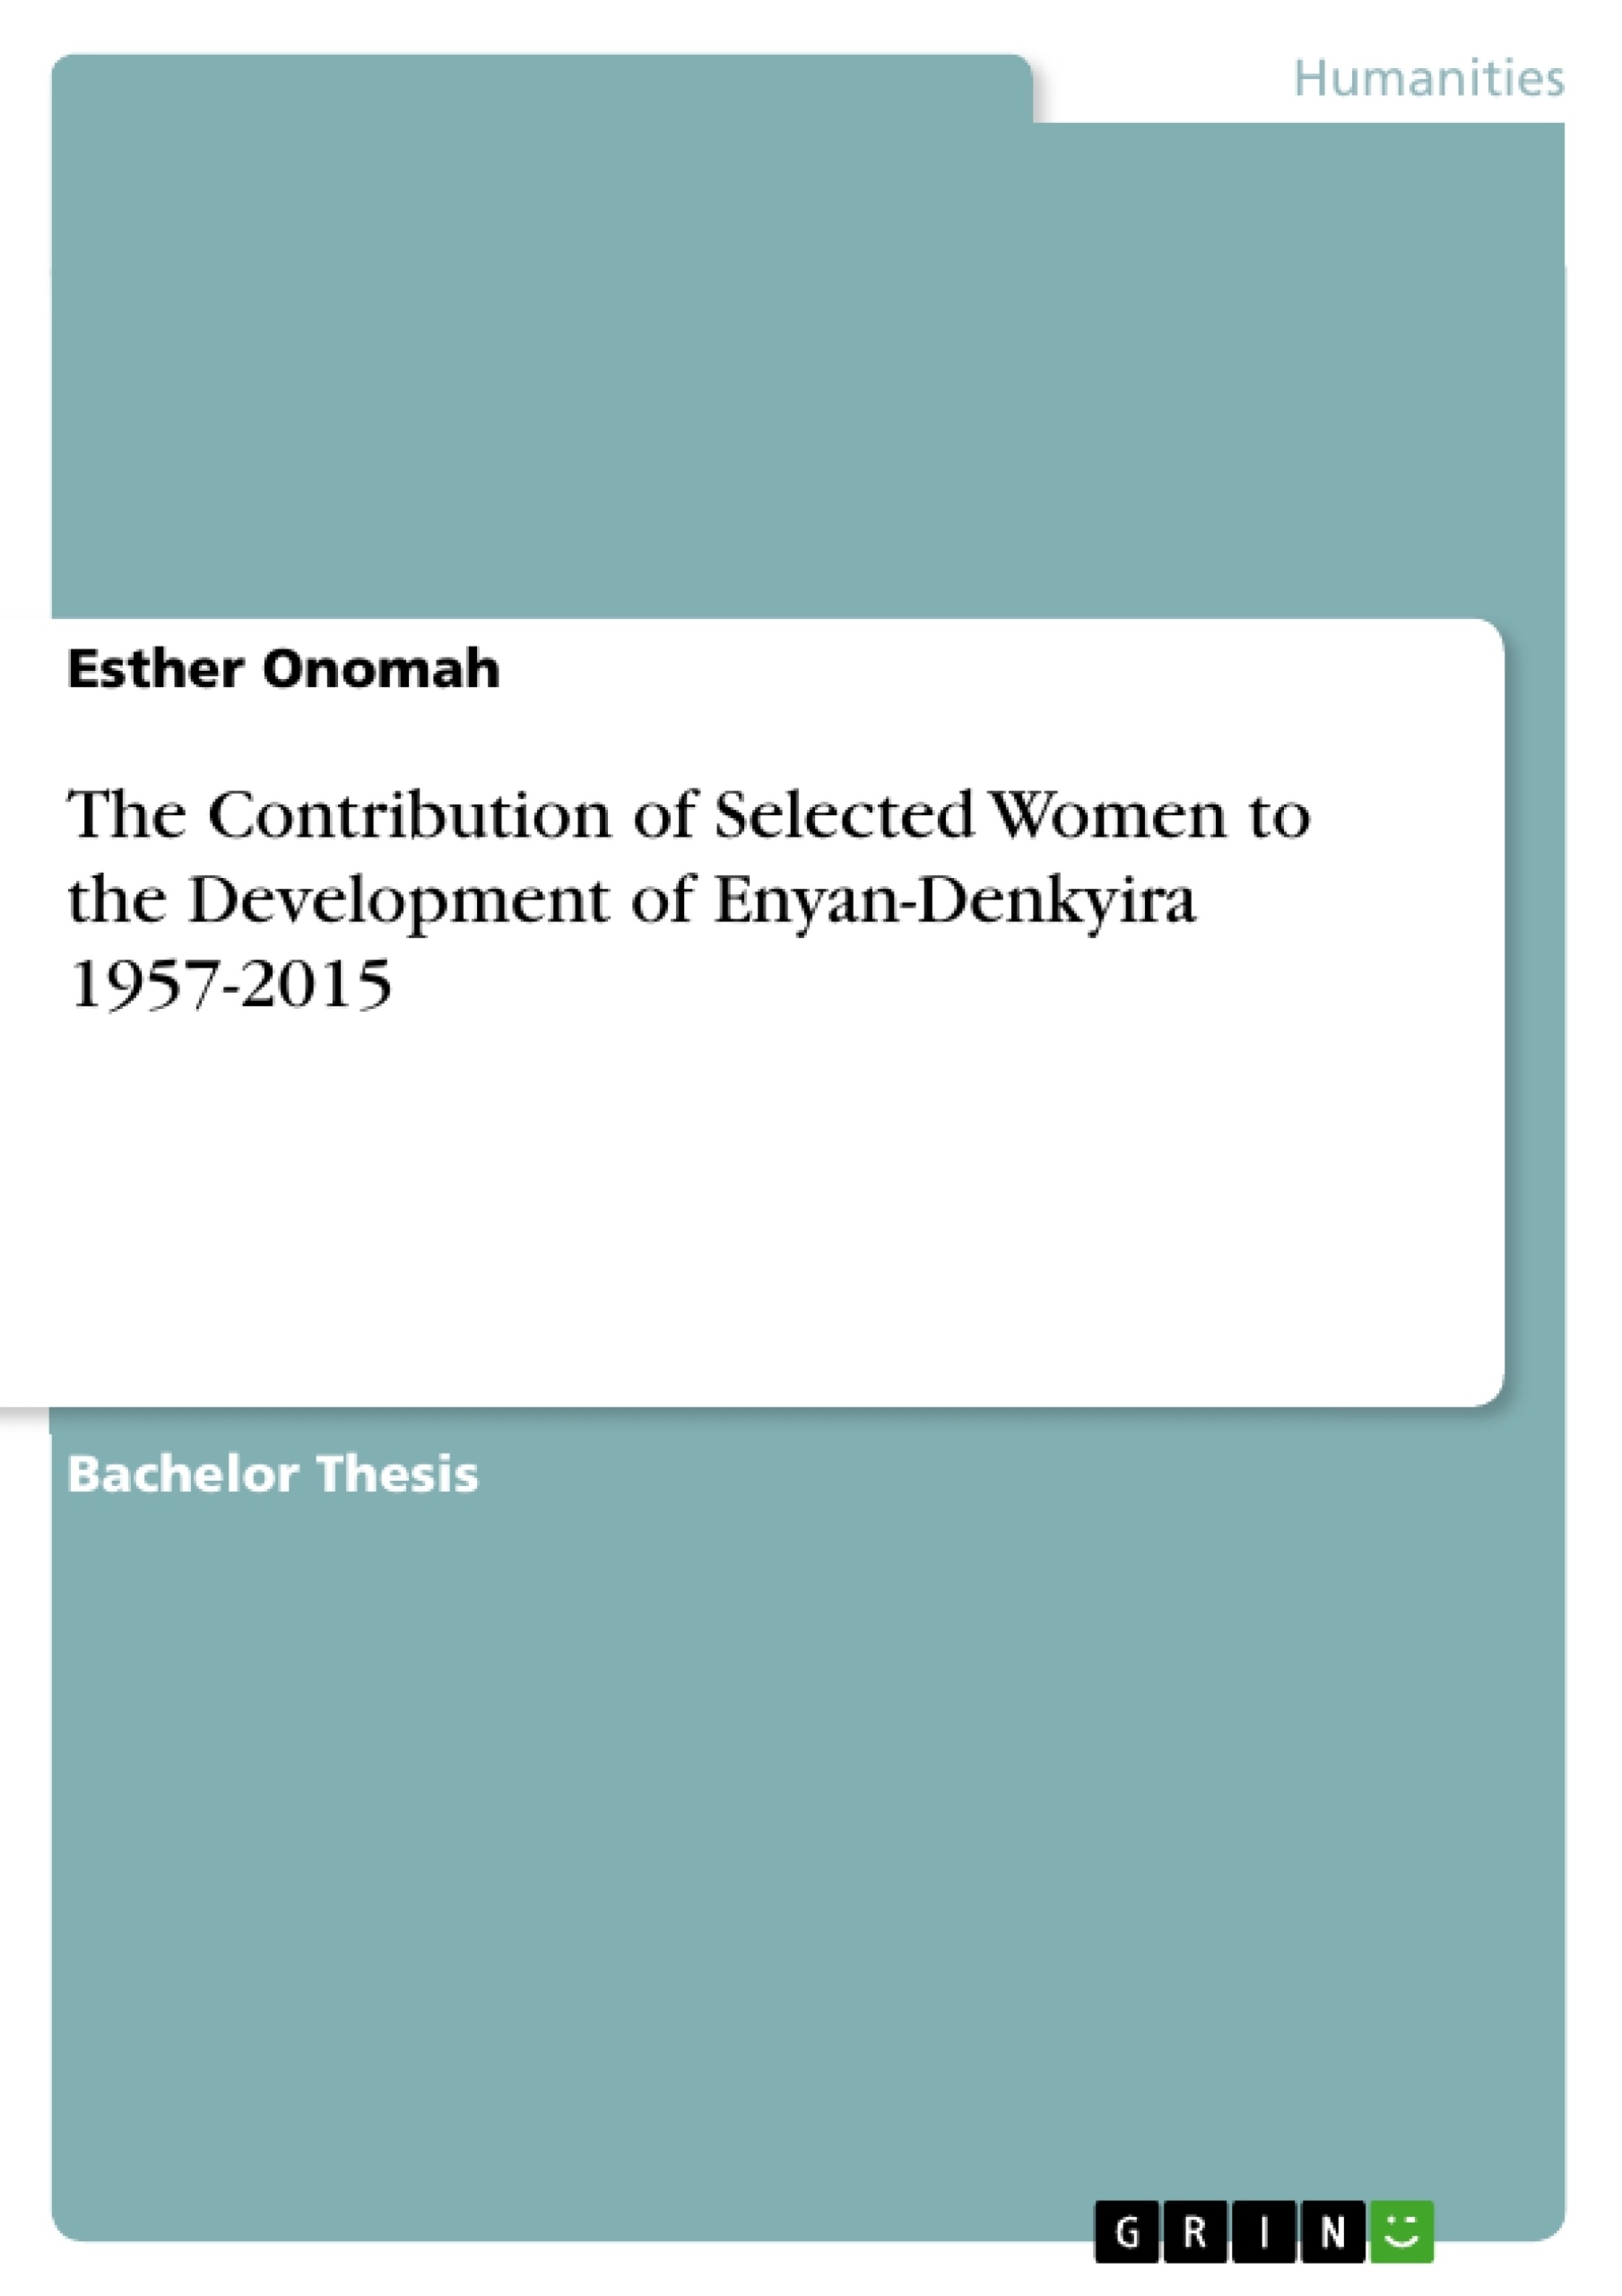 Titre: The Contribution of Selected Women to the Development of Enyan-Denkyira 1957-2015